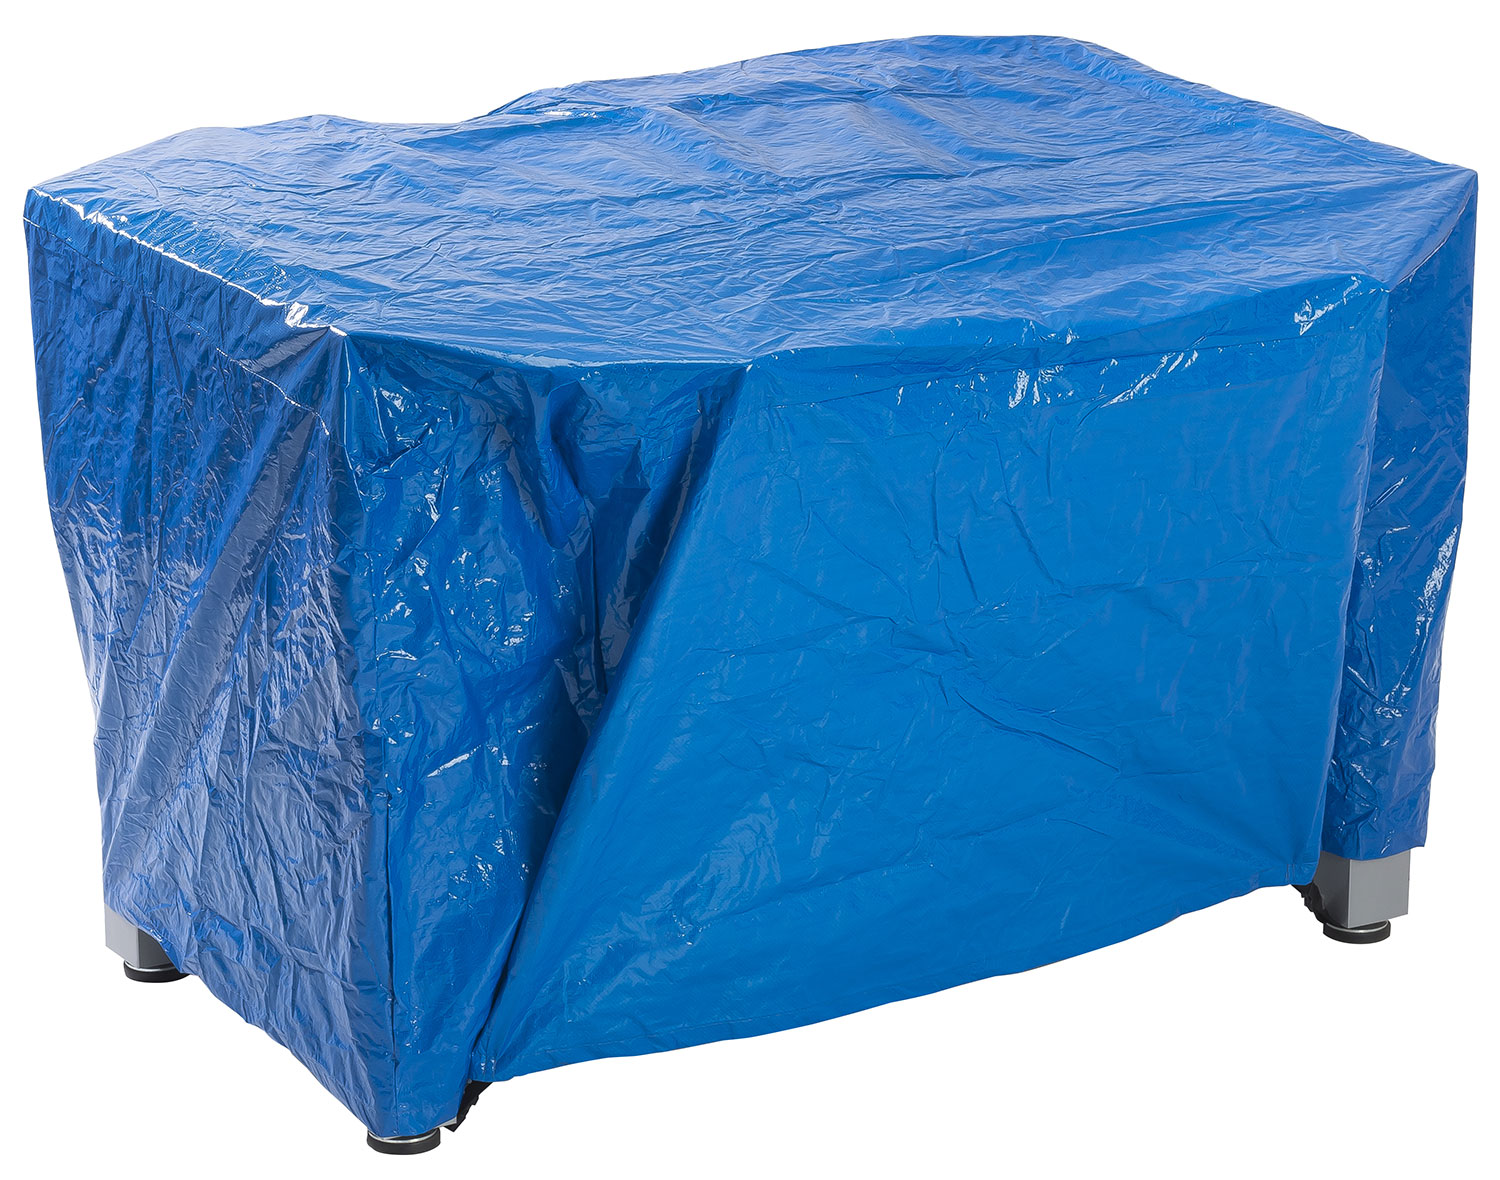 Protective Football Table Cover